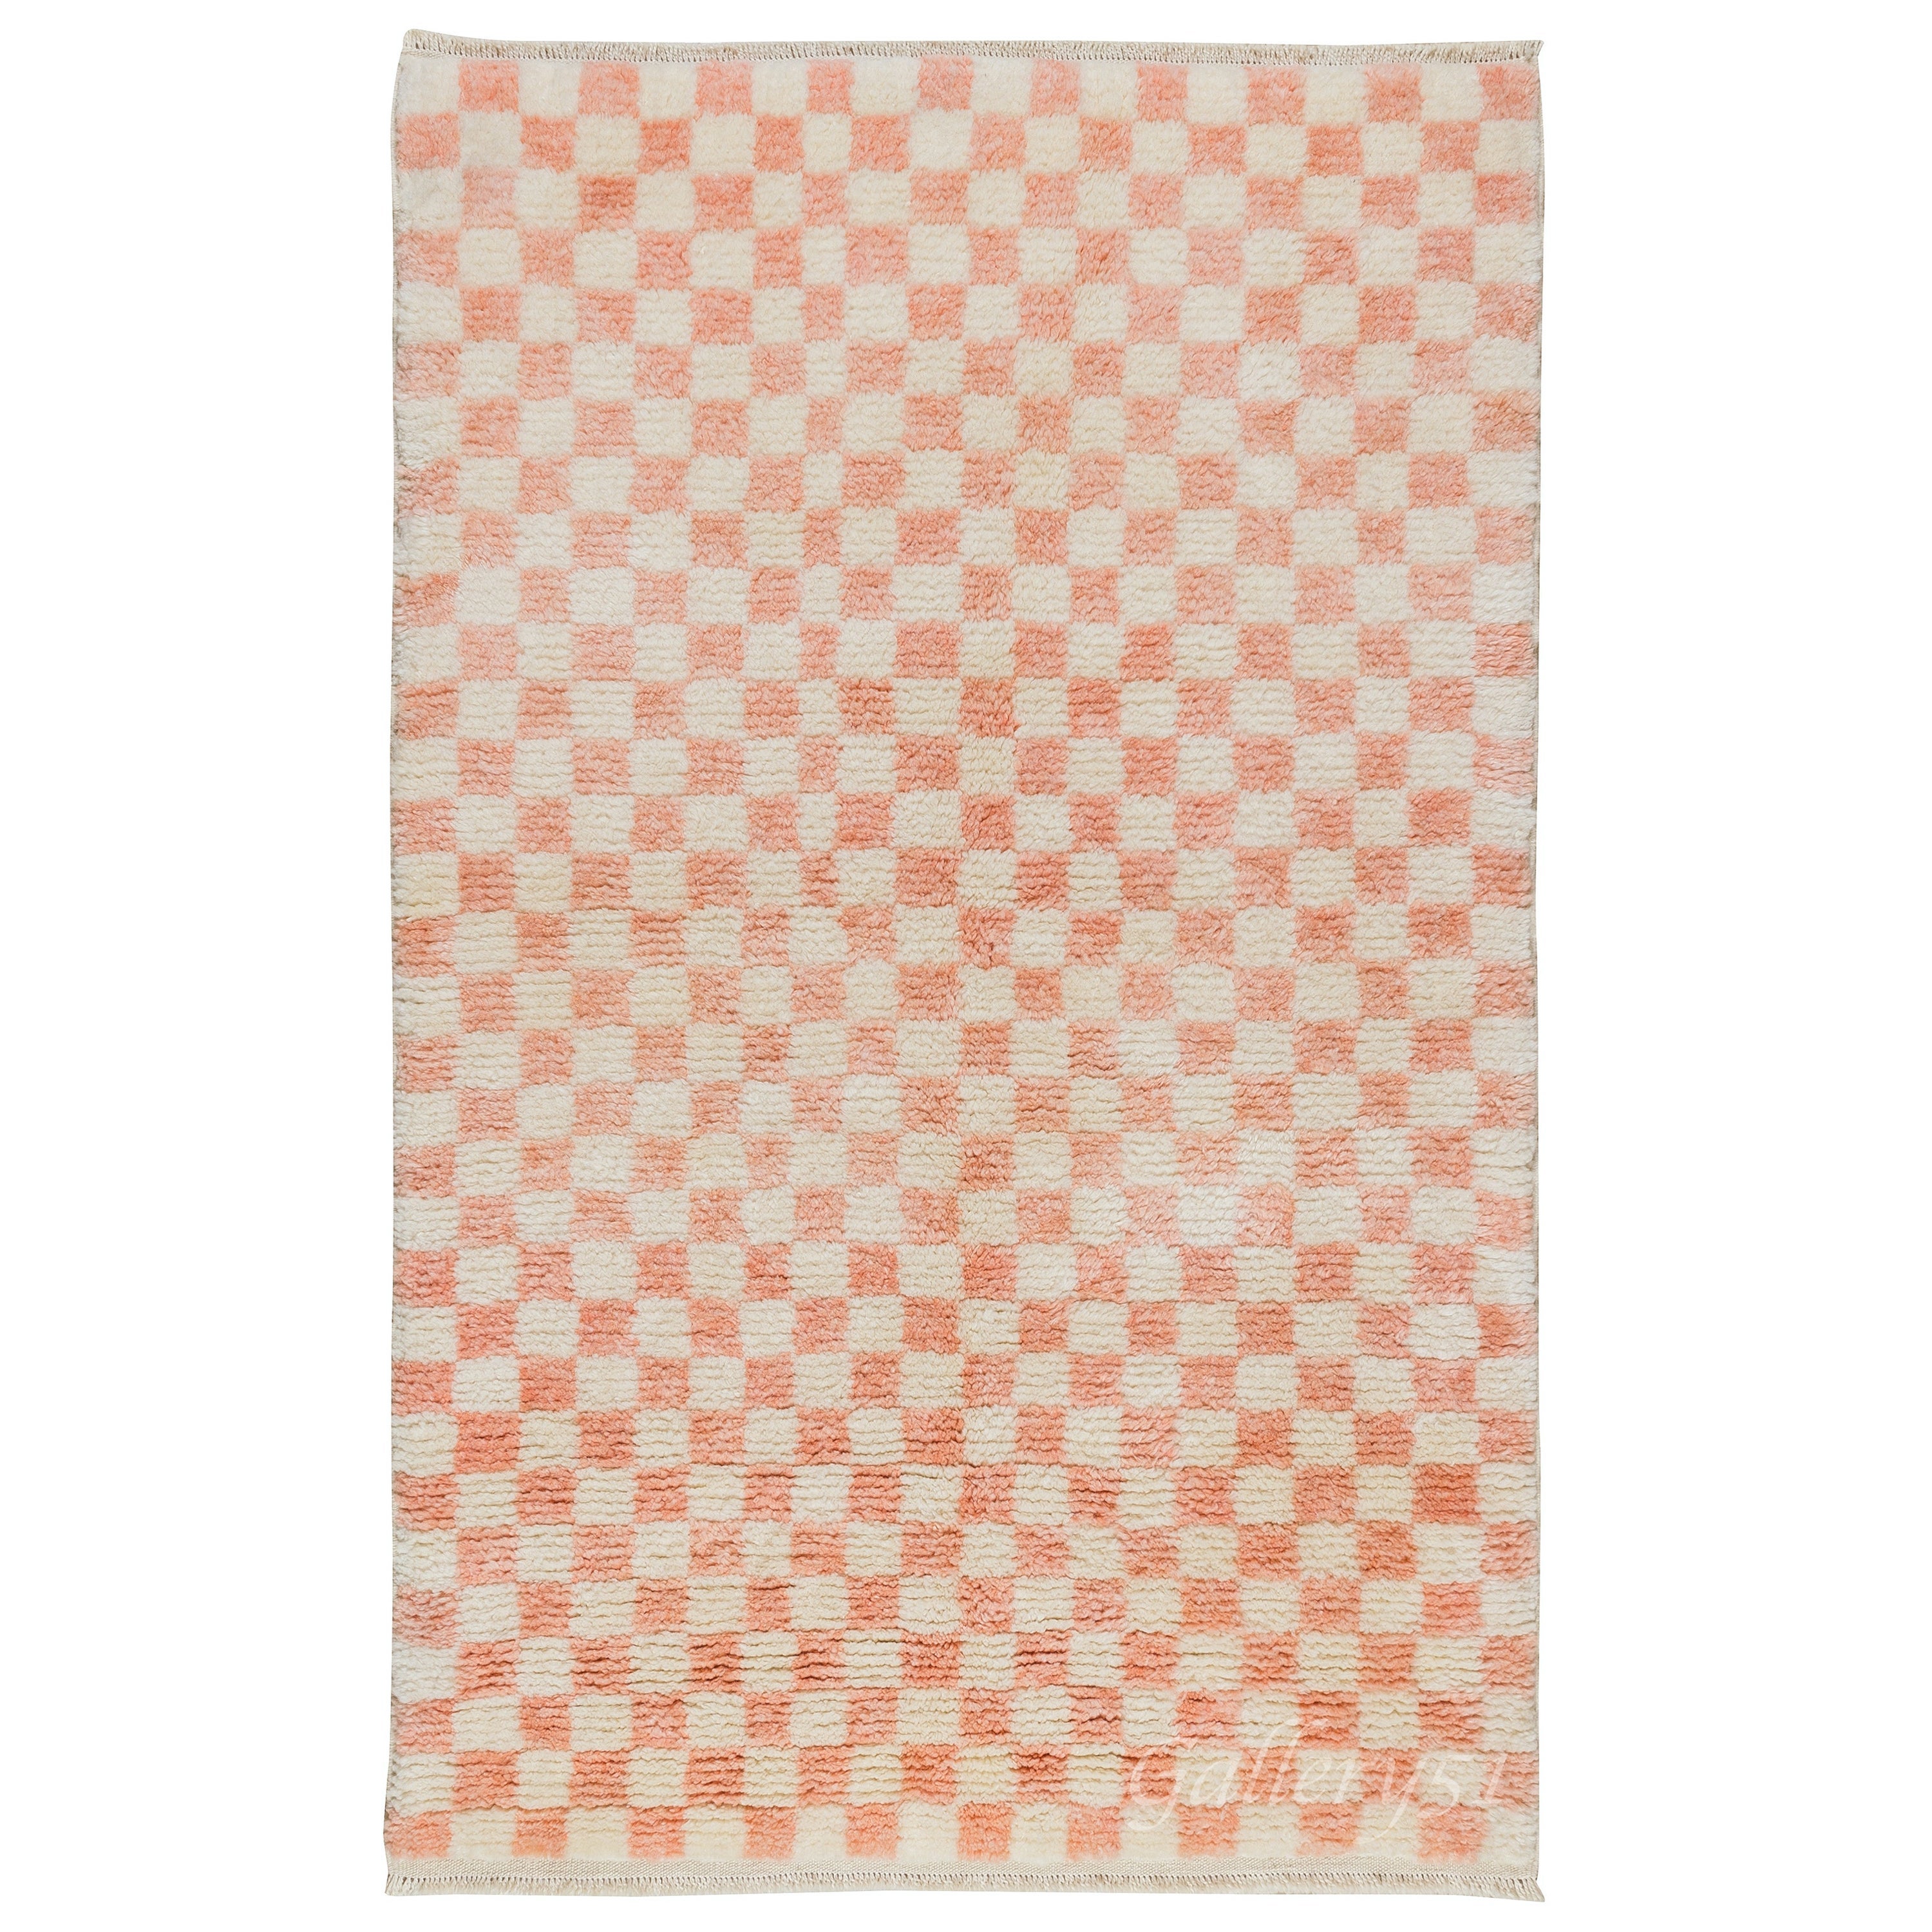 4x6 ft Handmade Checkered Design Tulu Rug in Soft Pink & Beige. 100% Wool For Sale